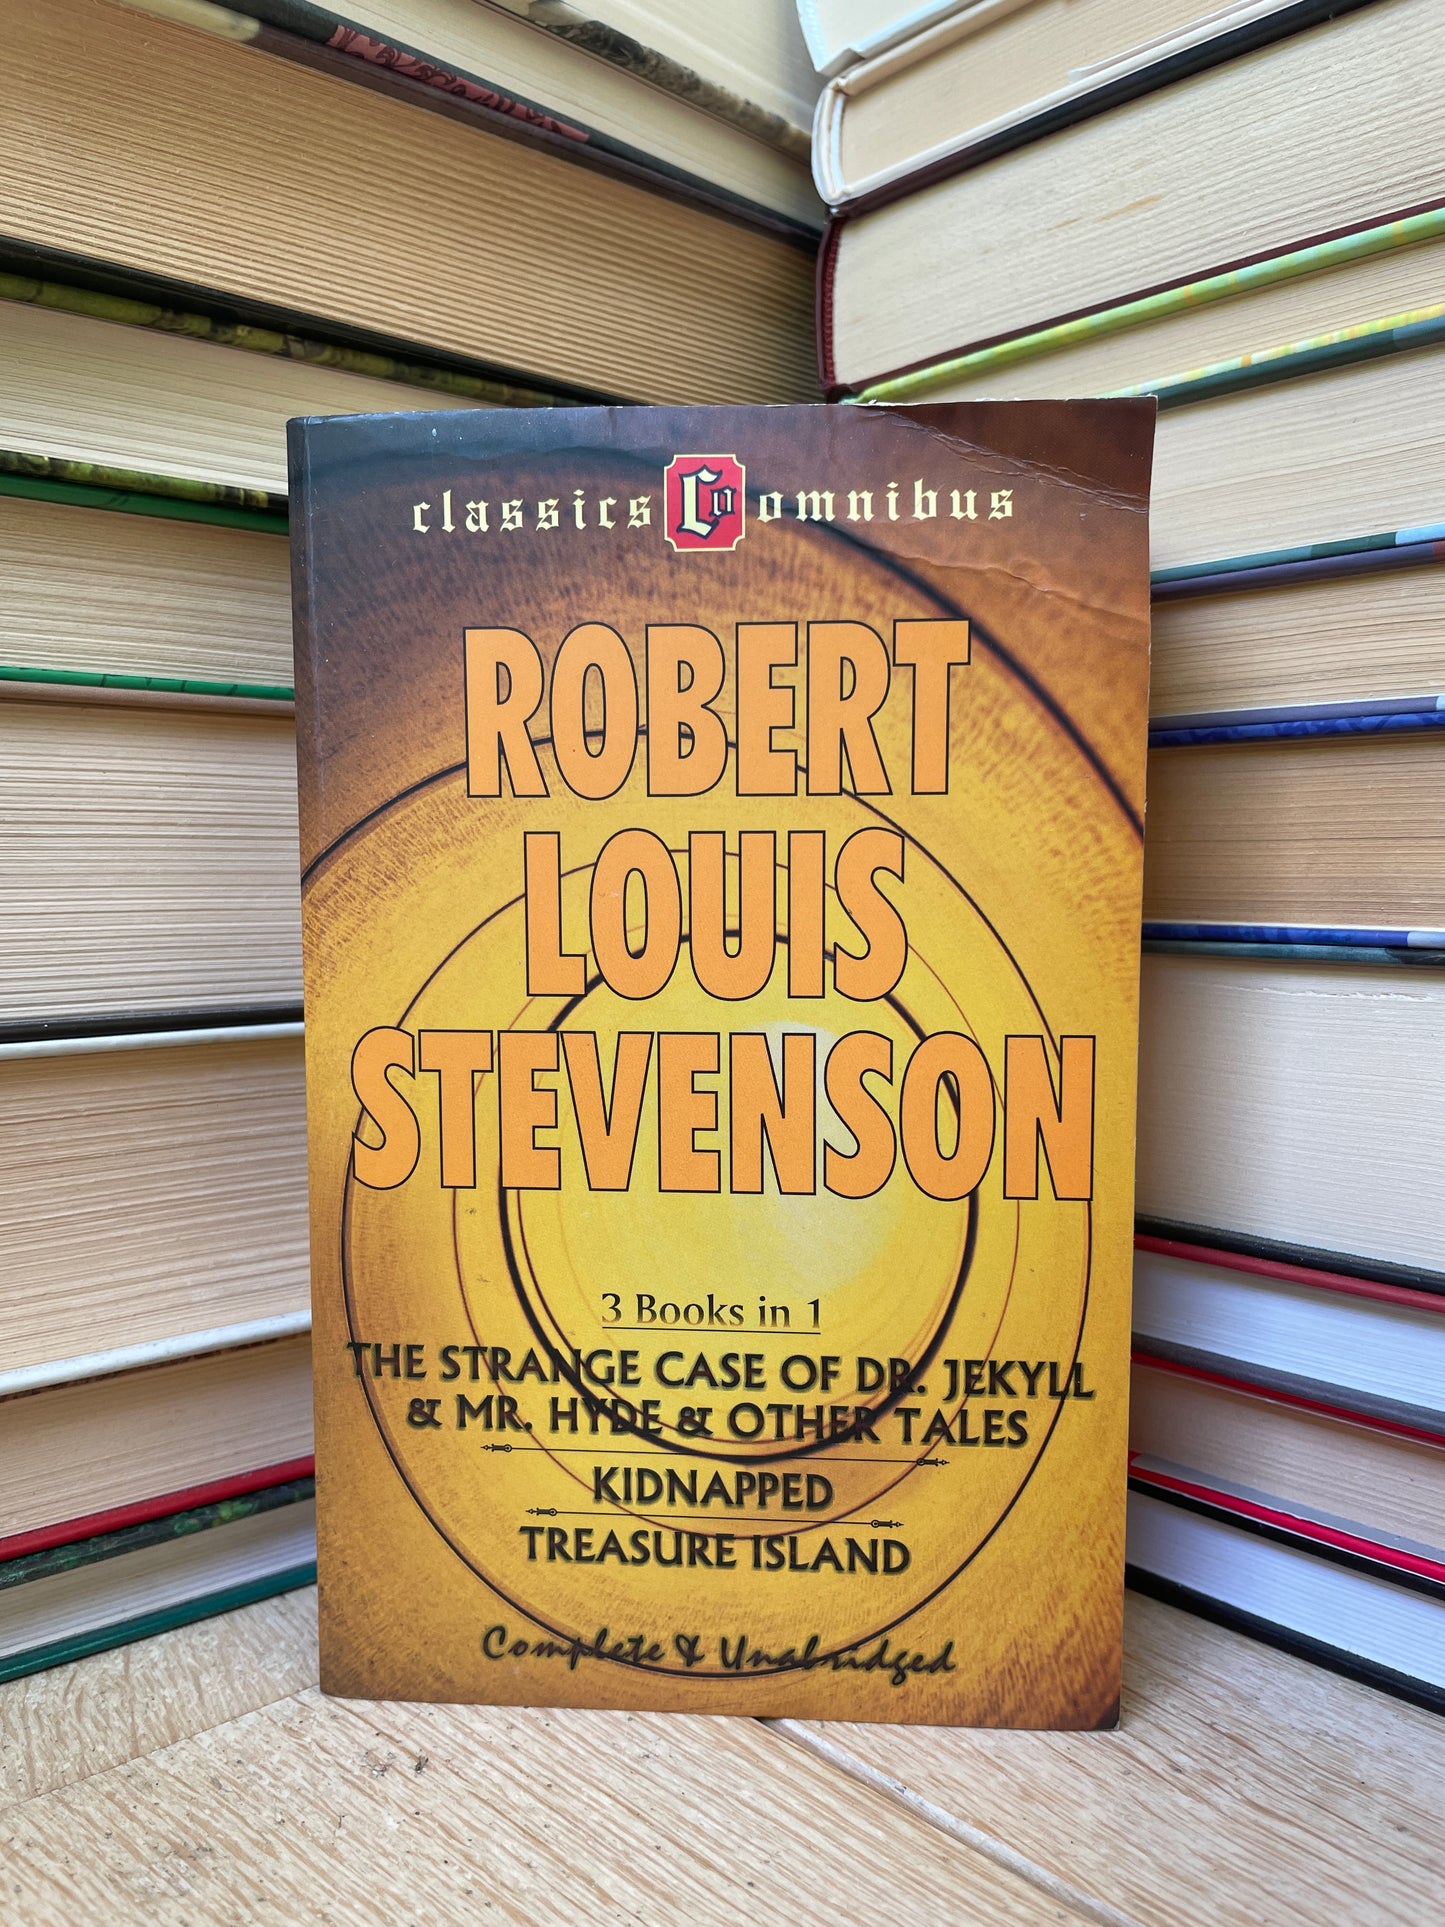 Robert Louis Stevenson - The Strange Case of Dr. Jekyll and Mr. Hyde and Other Tales. Kidnapped. Treasure Island